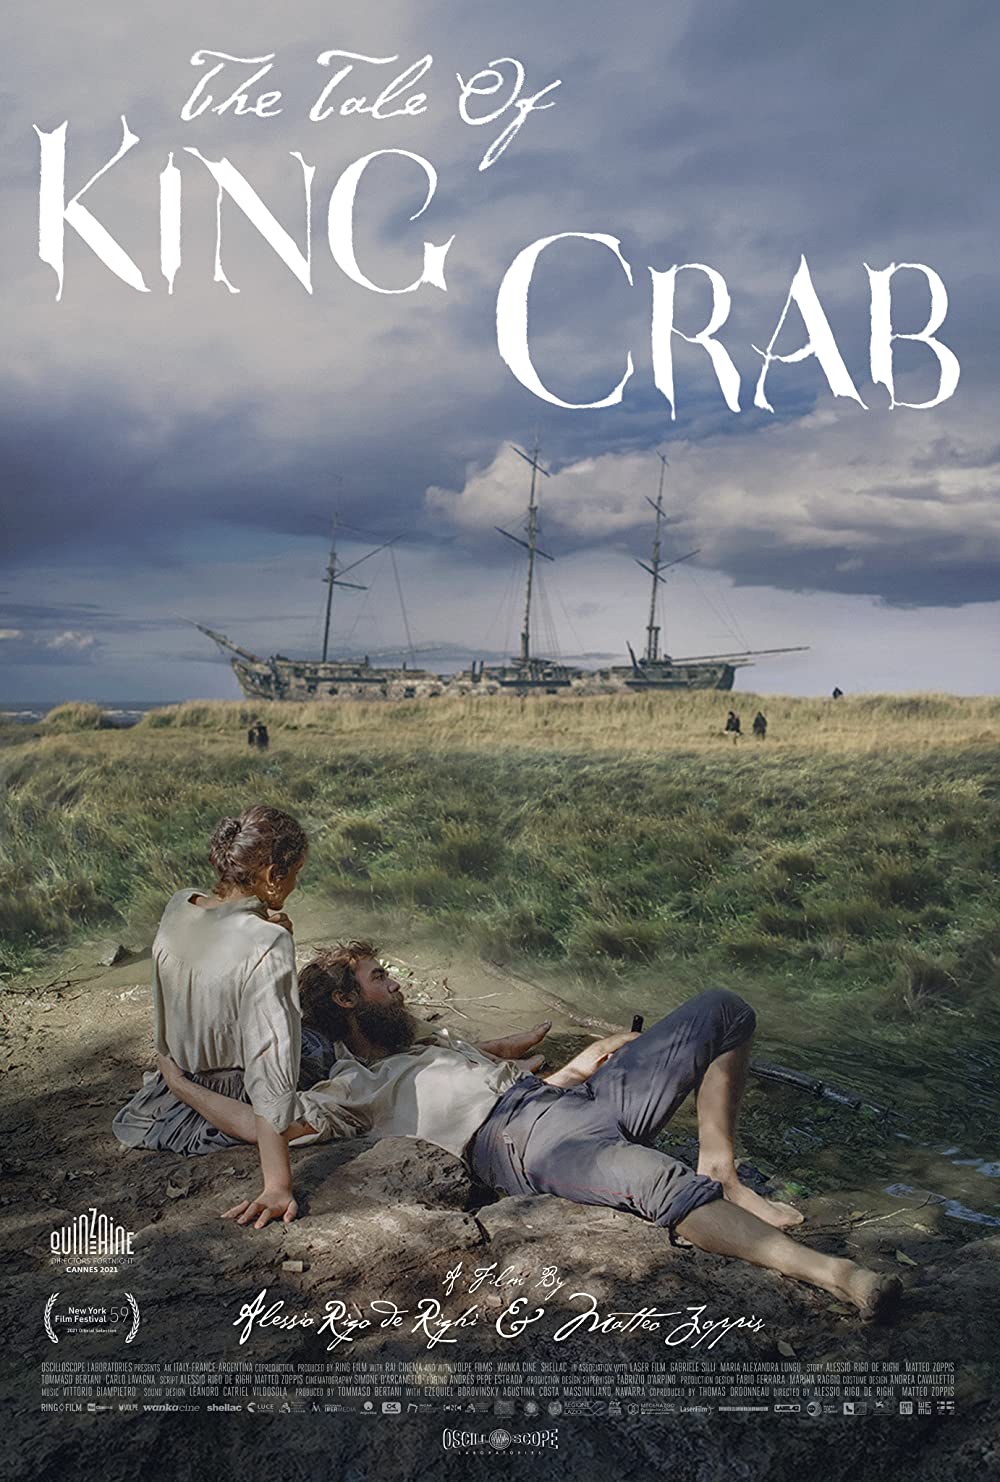 THE TALE OF THE KING CRABE